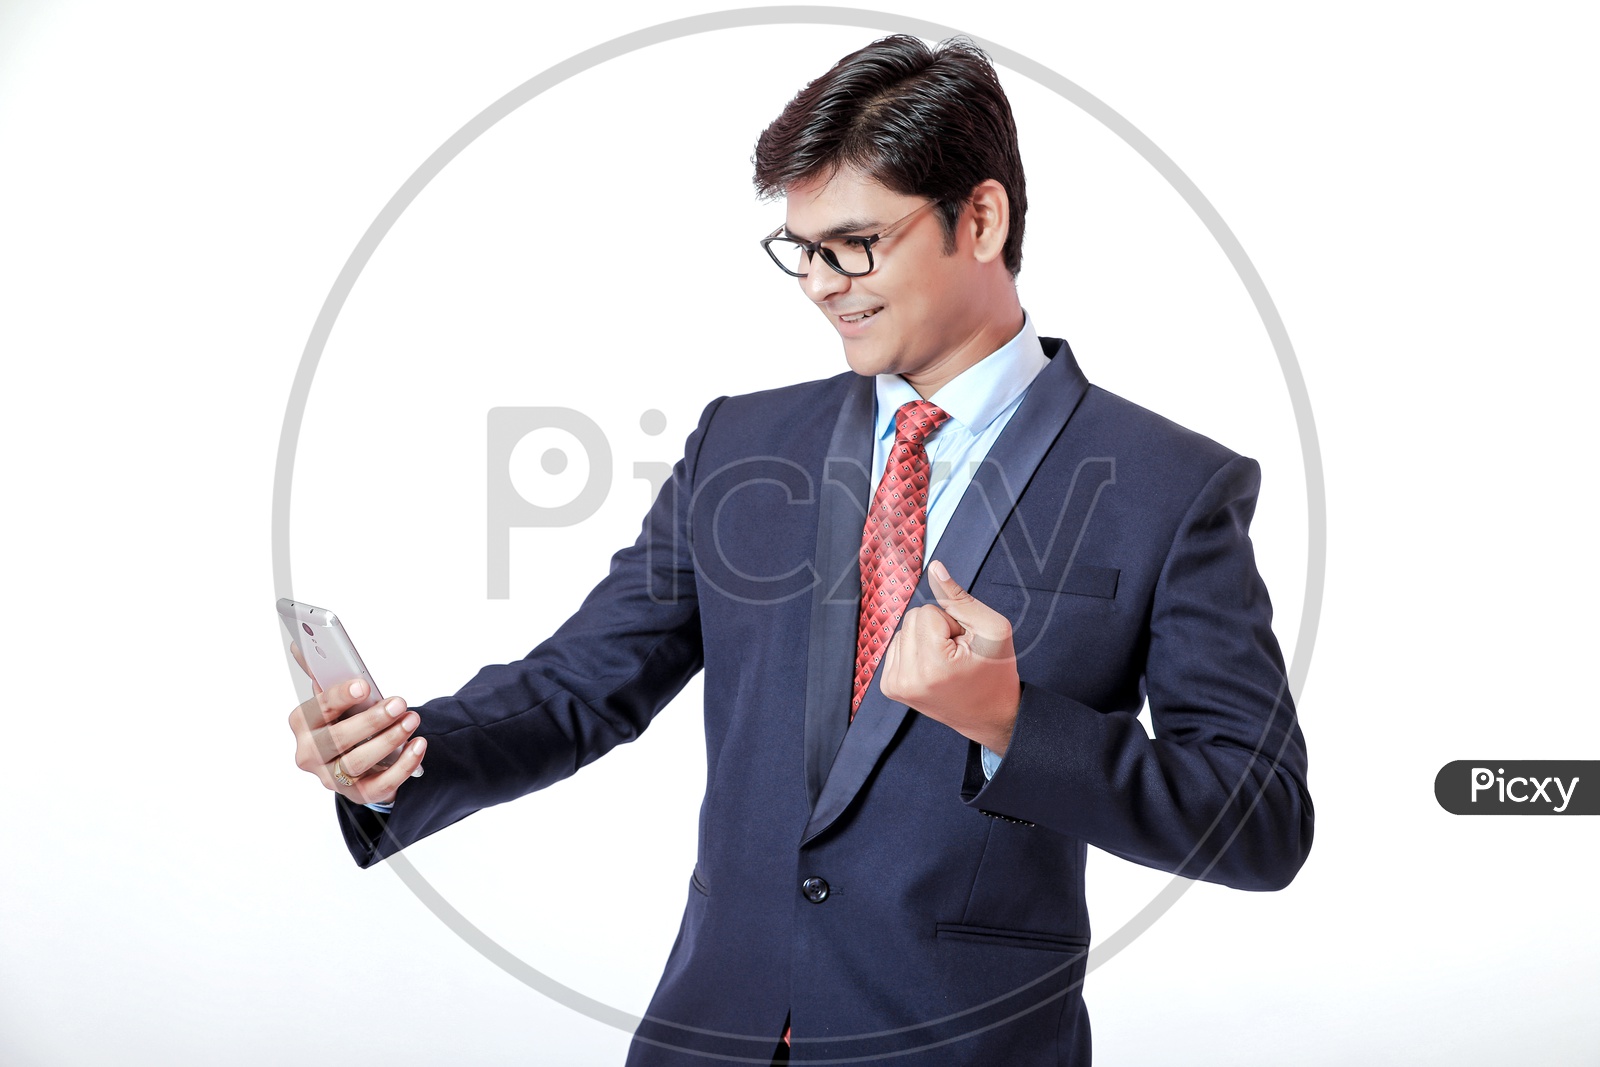 Indian Young Professional Man In Suite Speaking on Phone  with a Smile On Face  and with Gestures